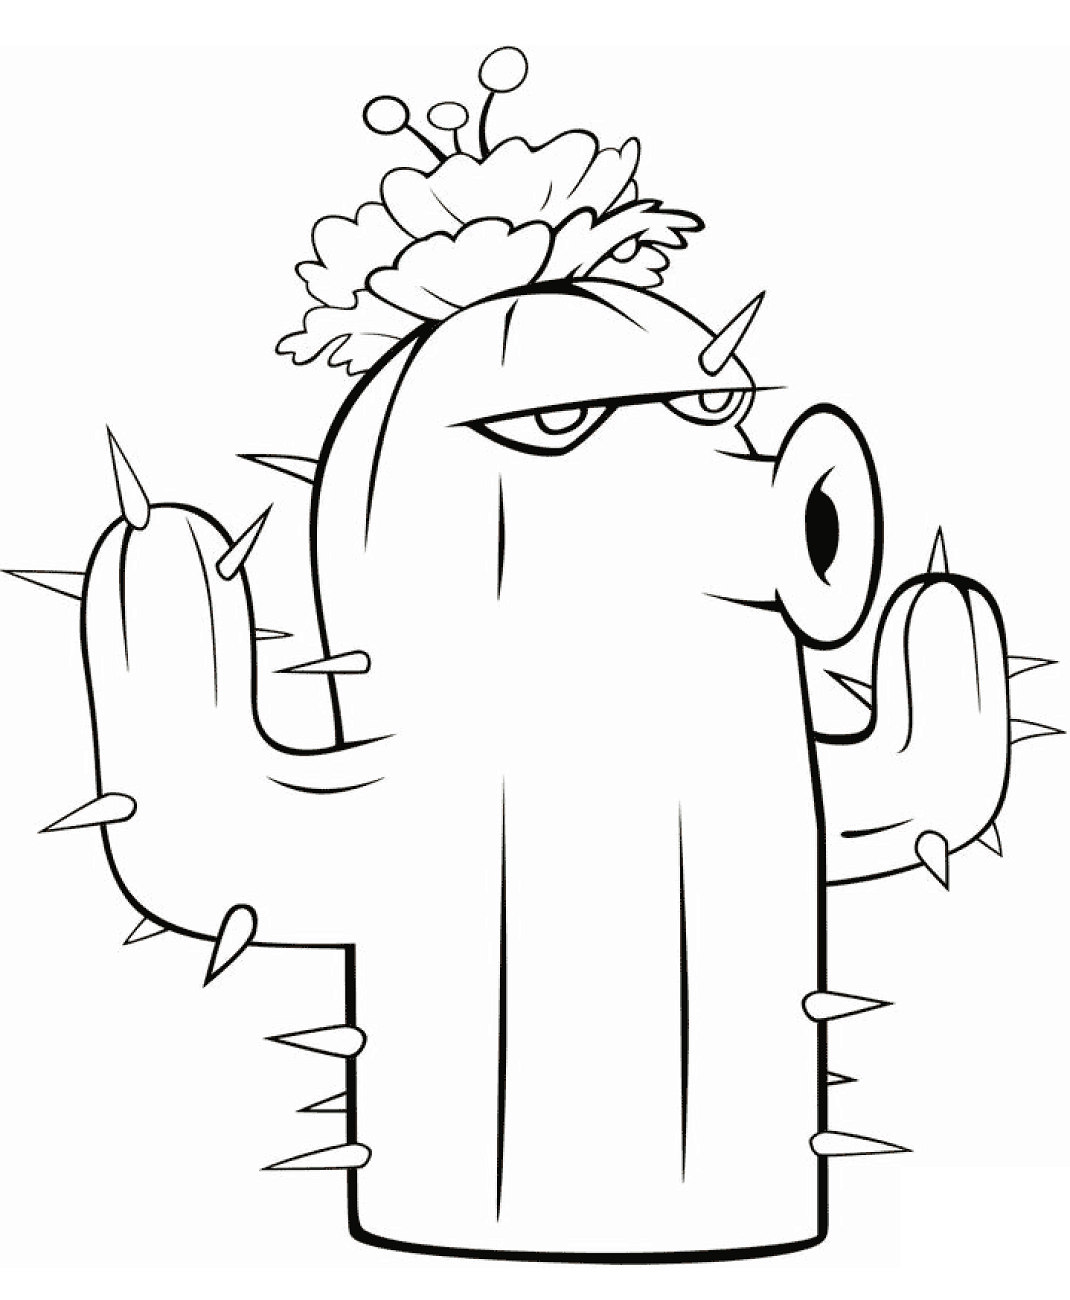 Cactus In Plants vs. Zombies Coloring Page - Free Printable Coloring Pages  for Kids